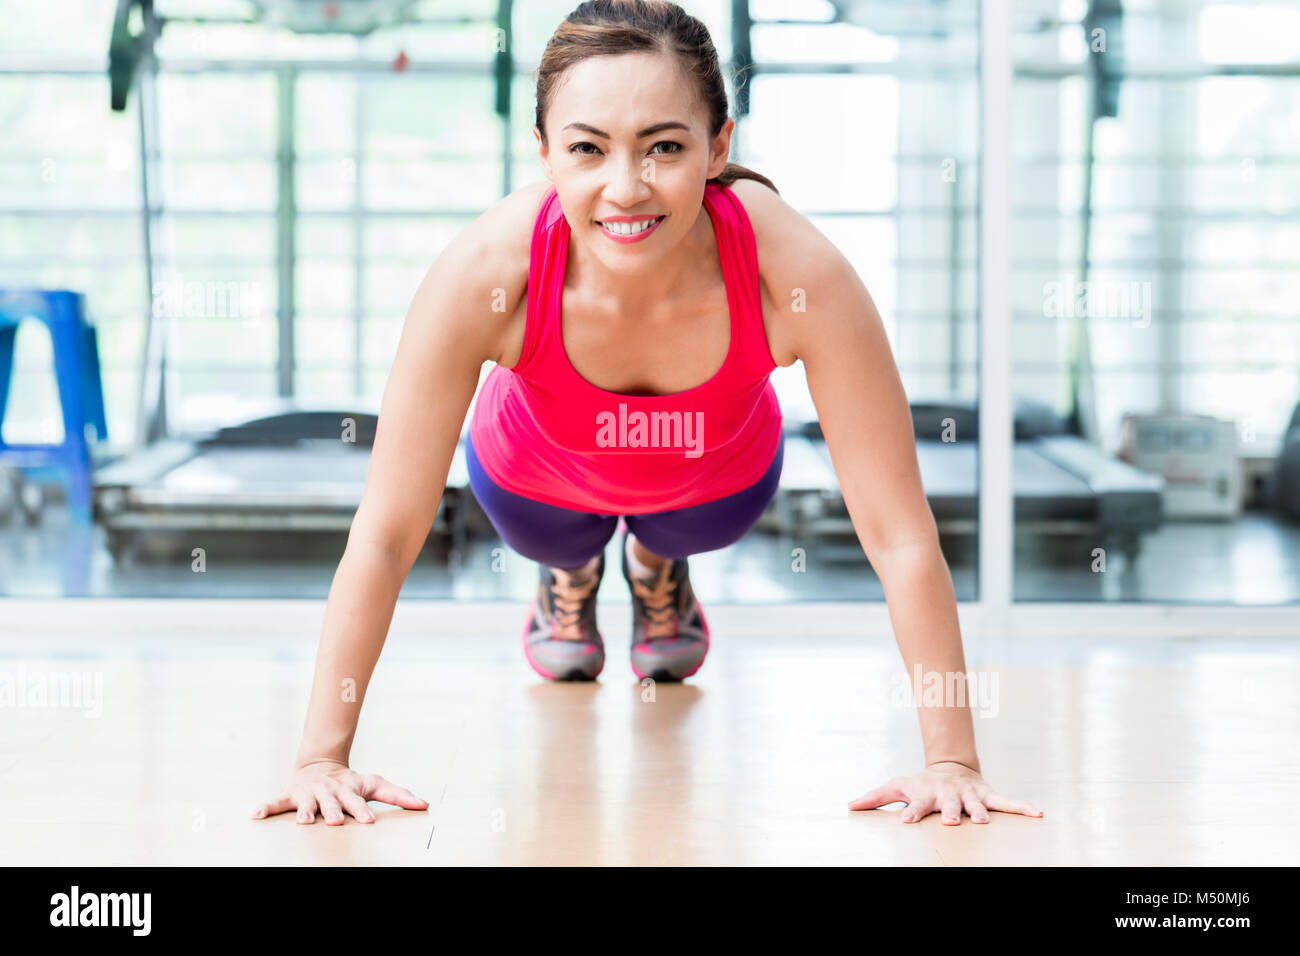 Smiling young woman doing pushup in gym Stock Photo